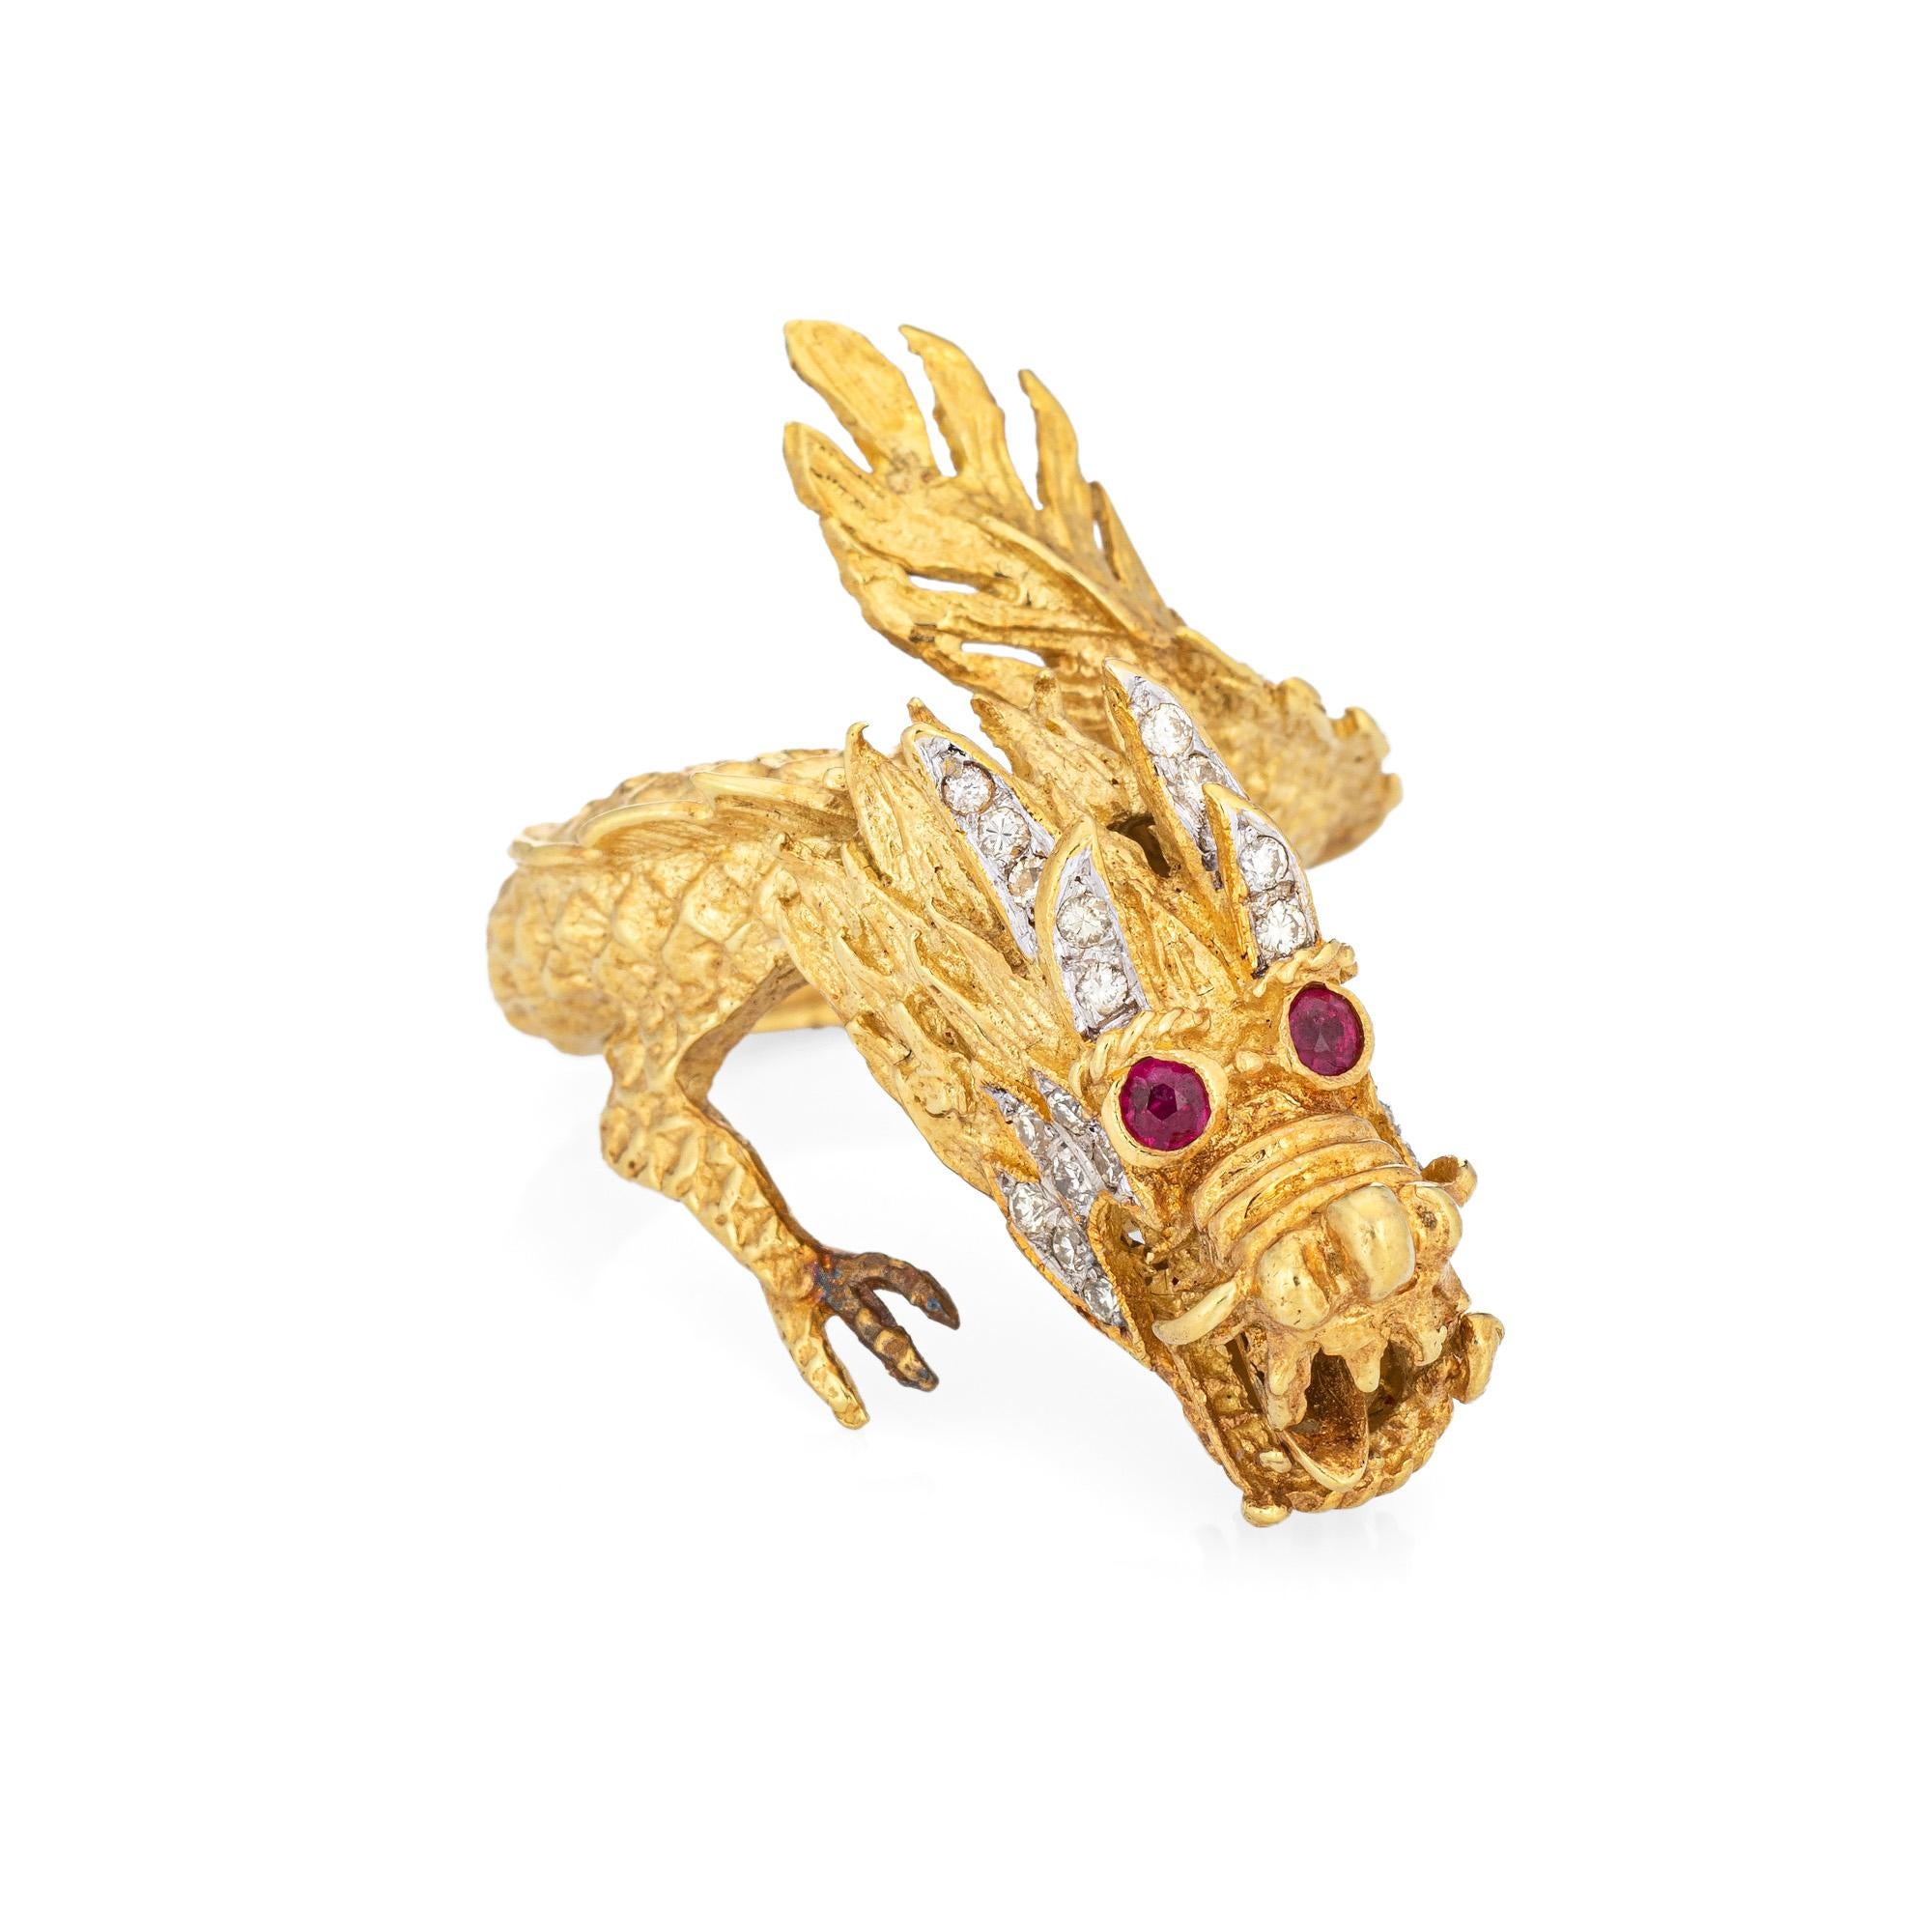 Unique & stylish vintage dragon ring (circa 1960s to 1970s) crafted in 18 karat yellow gold. 

24 diamonds total an estimated 0.12 carats (estimated at I-J color and SI1-I1 clarity). Two rubies are set into the eyes.  

The elaborate dragon features